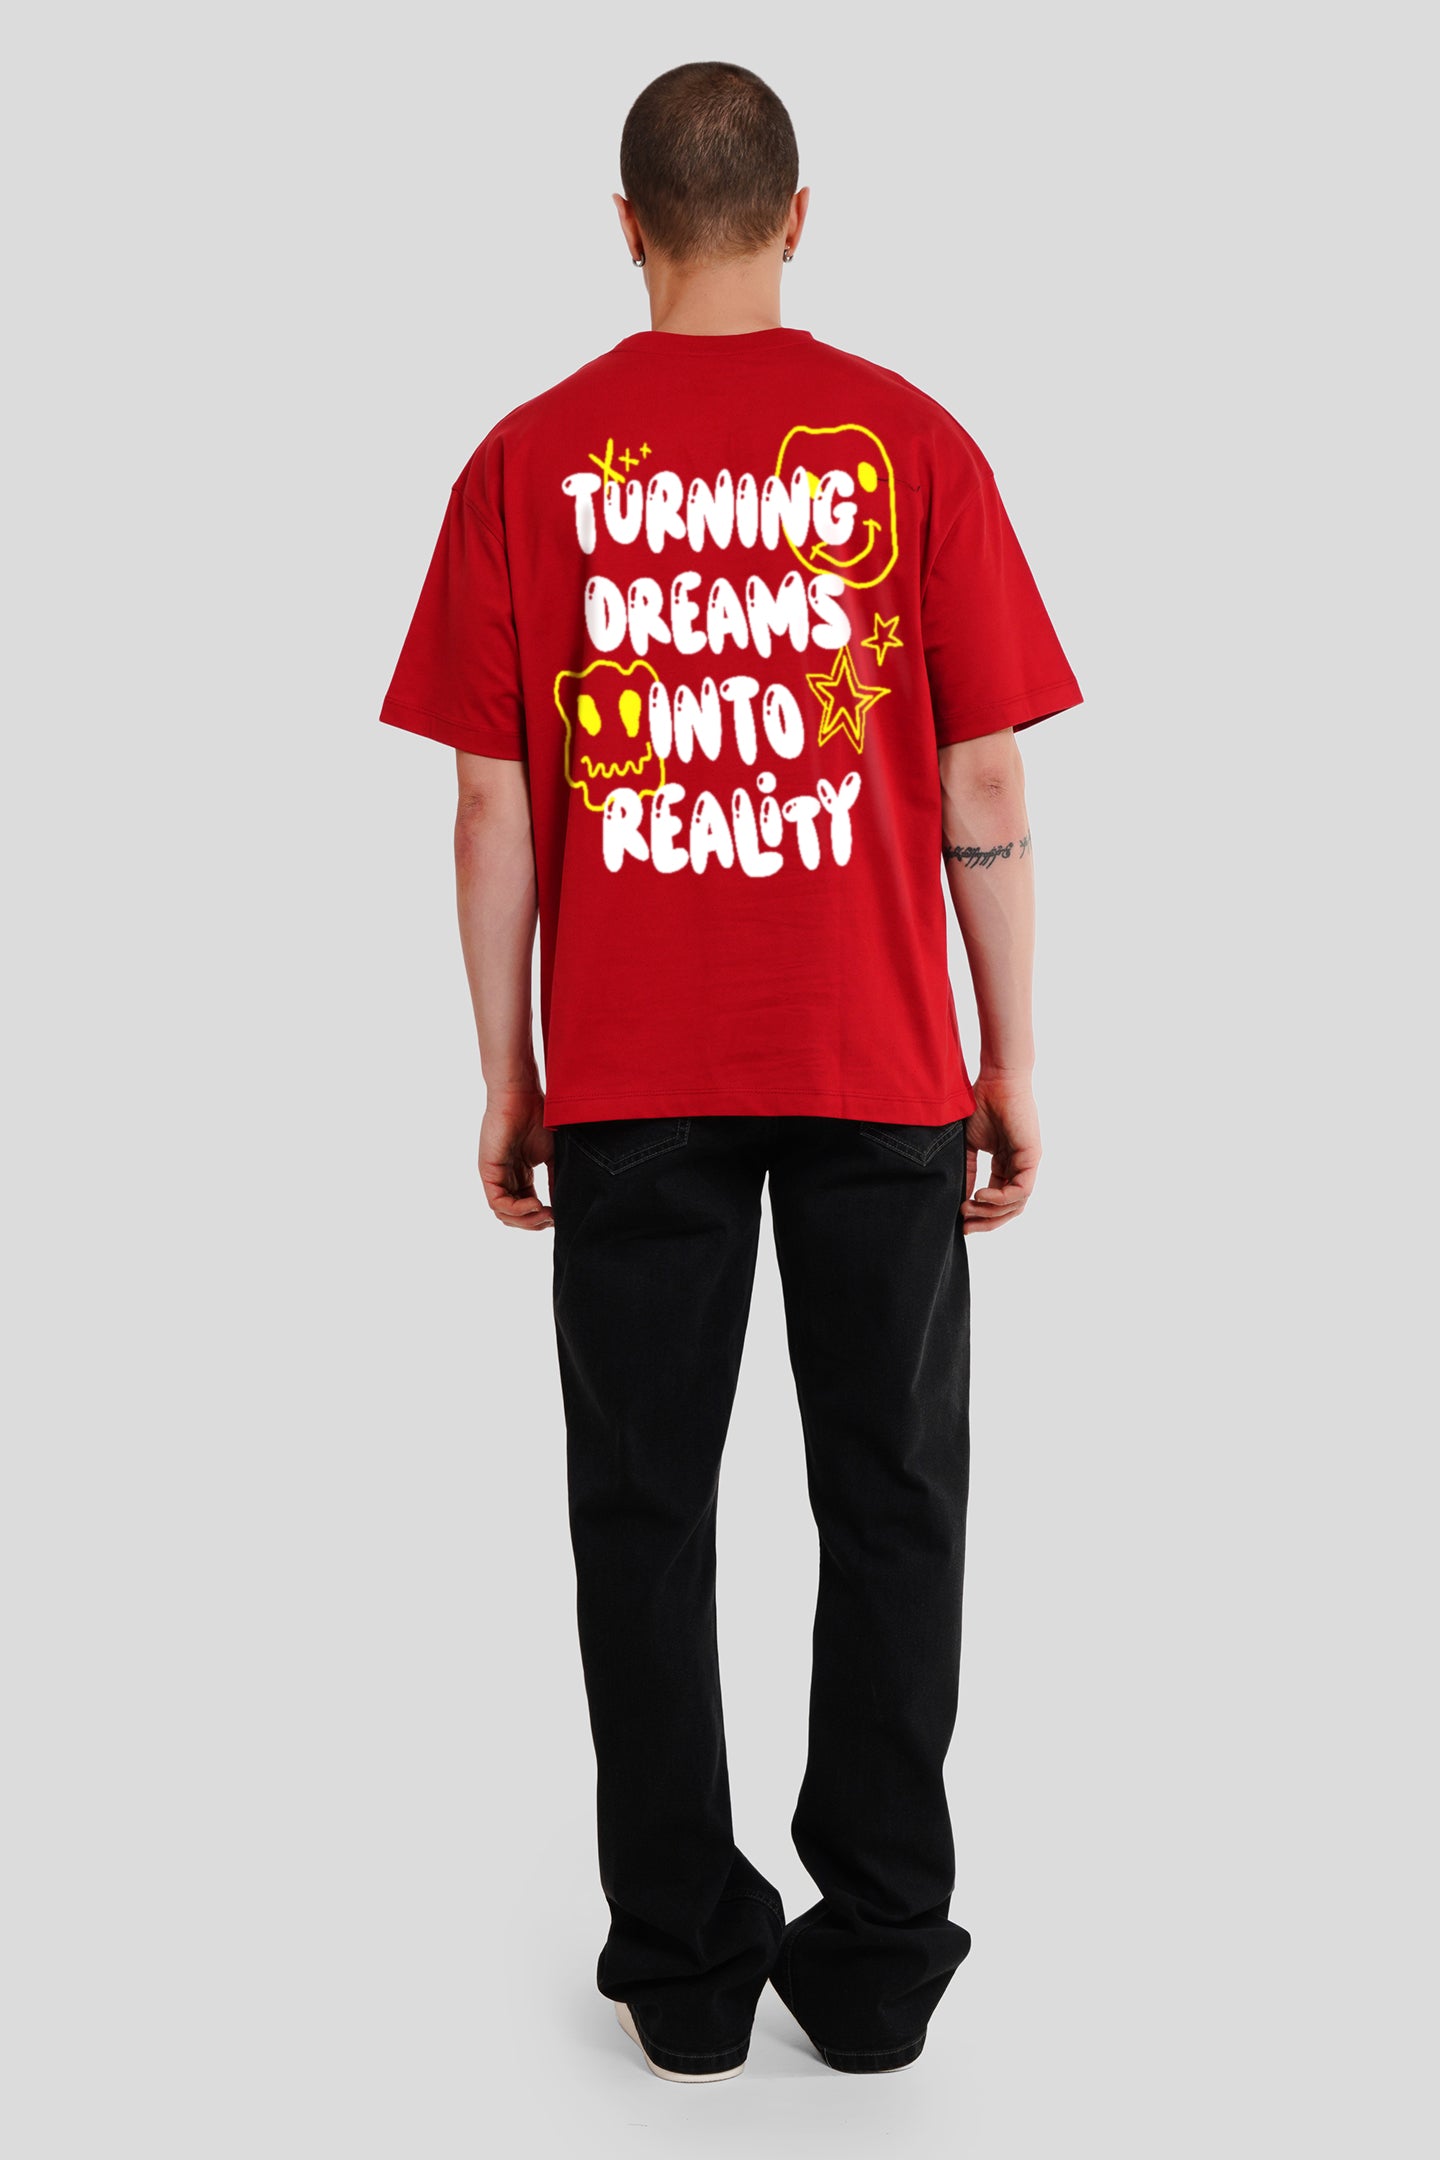 Turning Dreams Into Reality Red Printed T Shirt Men Oversized Fit With Front And Back Design Pic 2